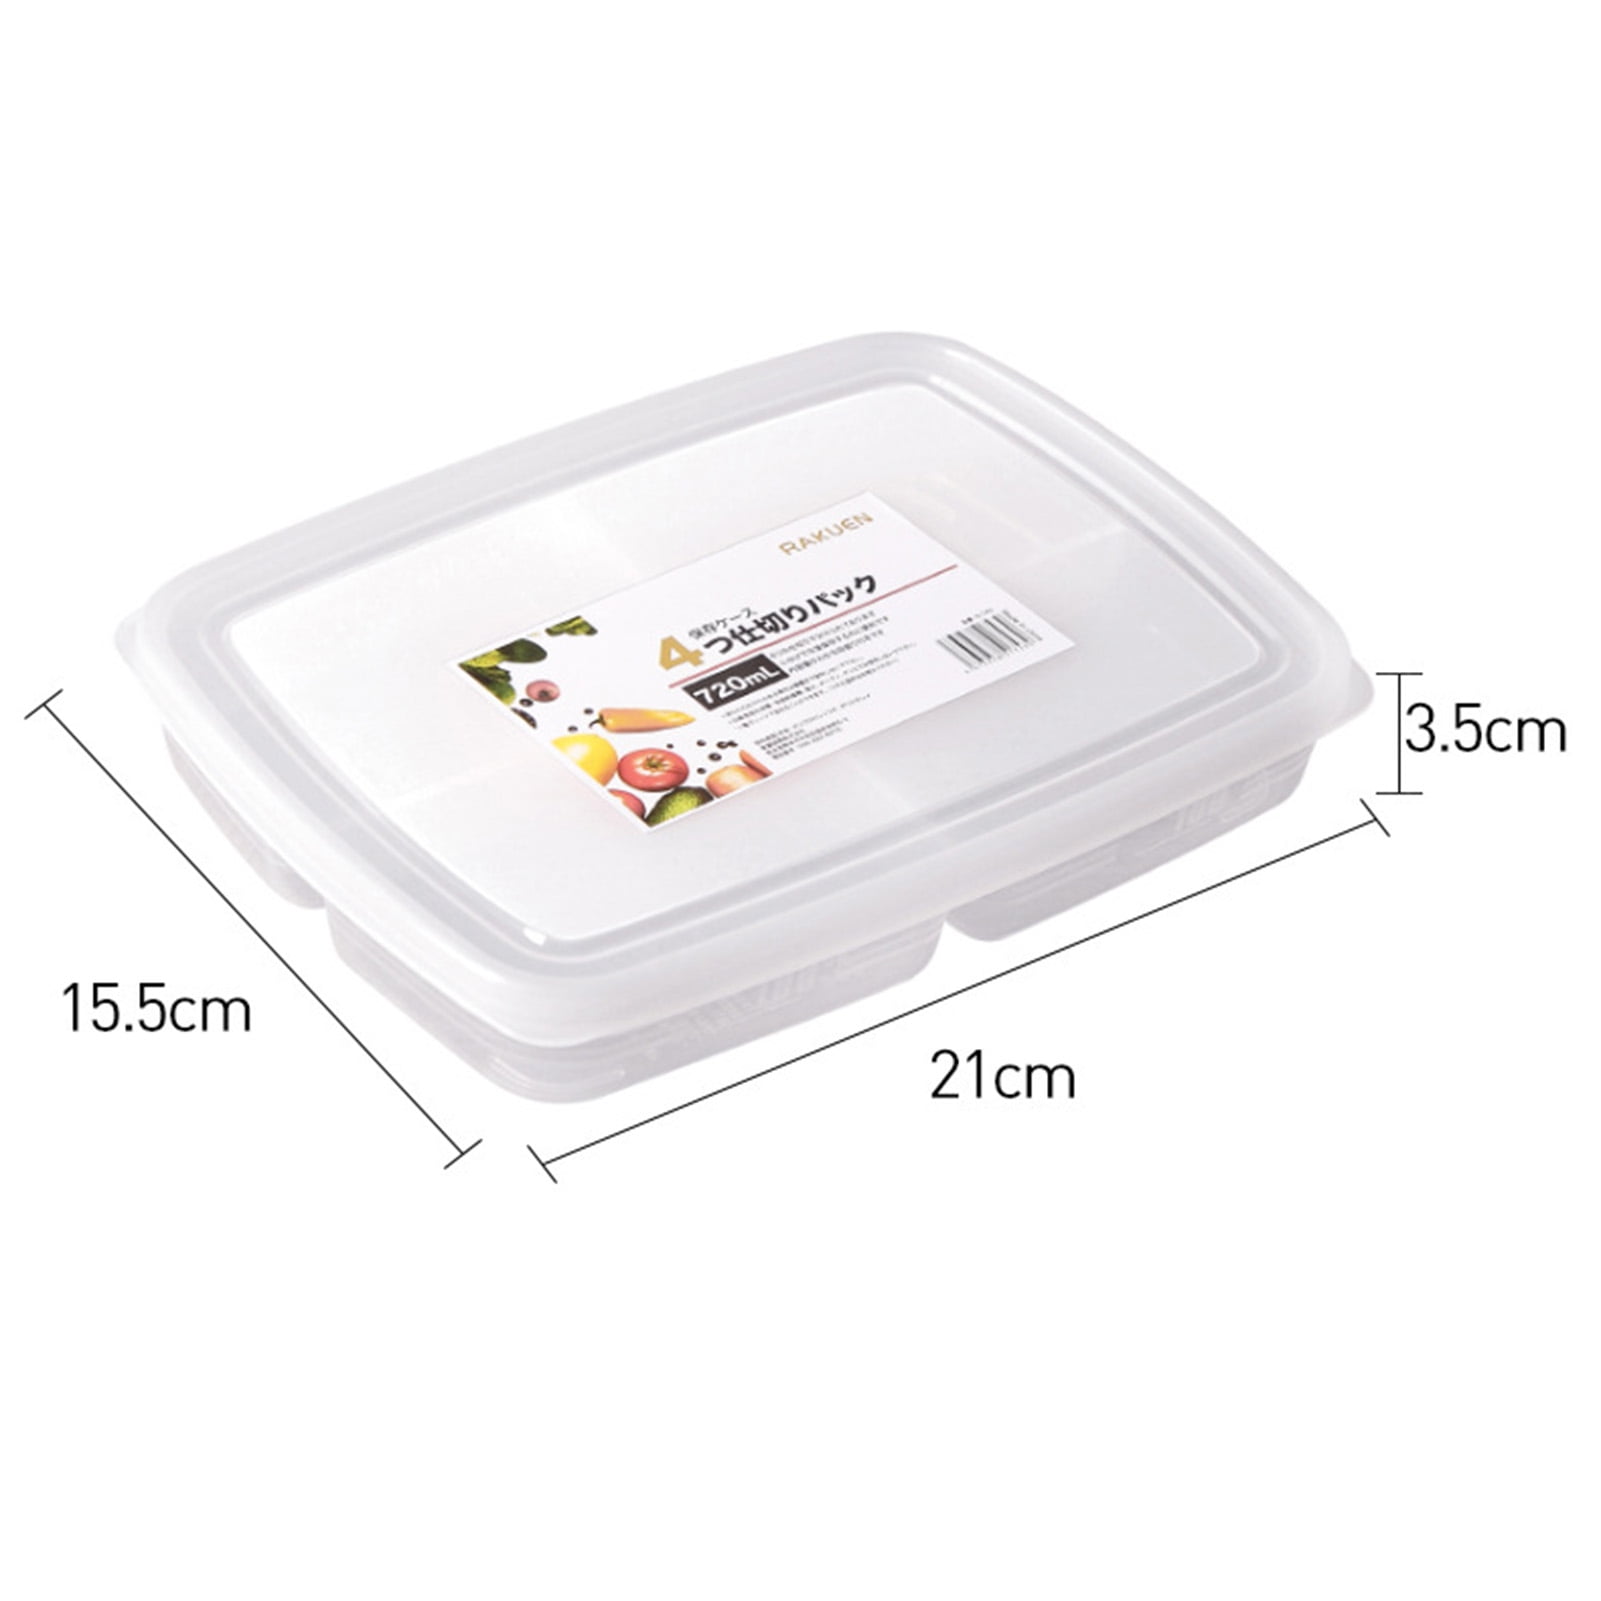 Frogued Fridge Storage Box Large Capacity Solid Construction Plastic All-Purpose Easy Snap Lock Airtight Food Container for Home (S), Size: 2XL